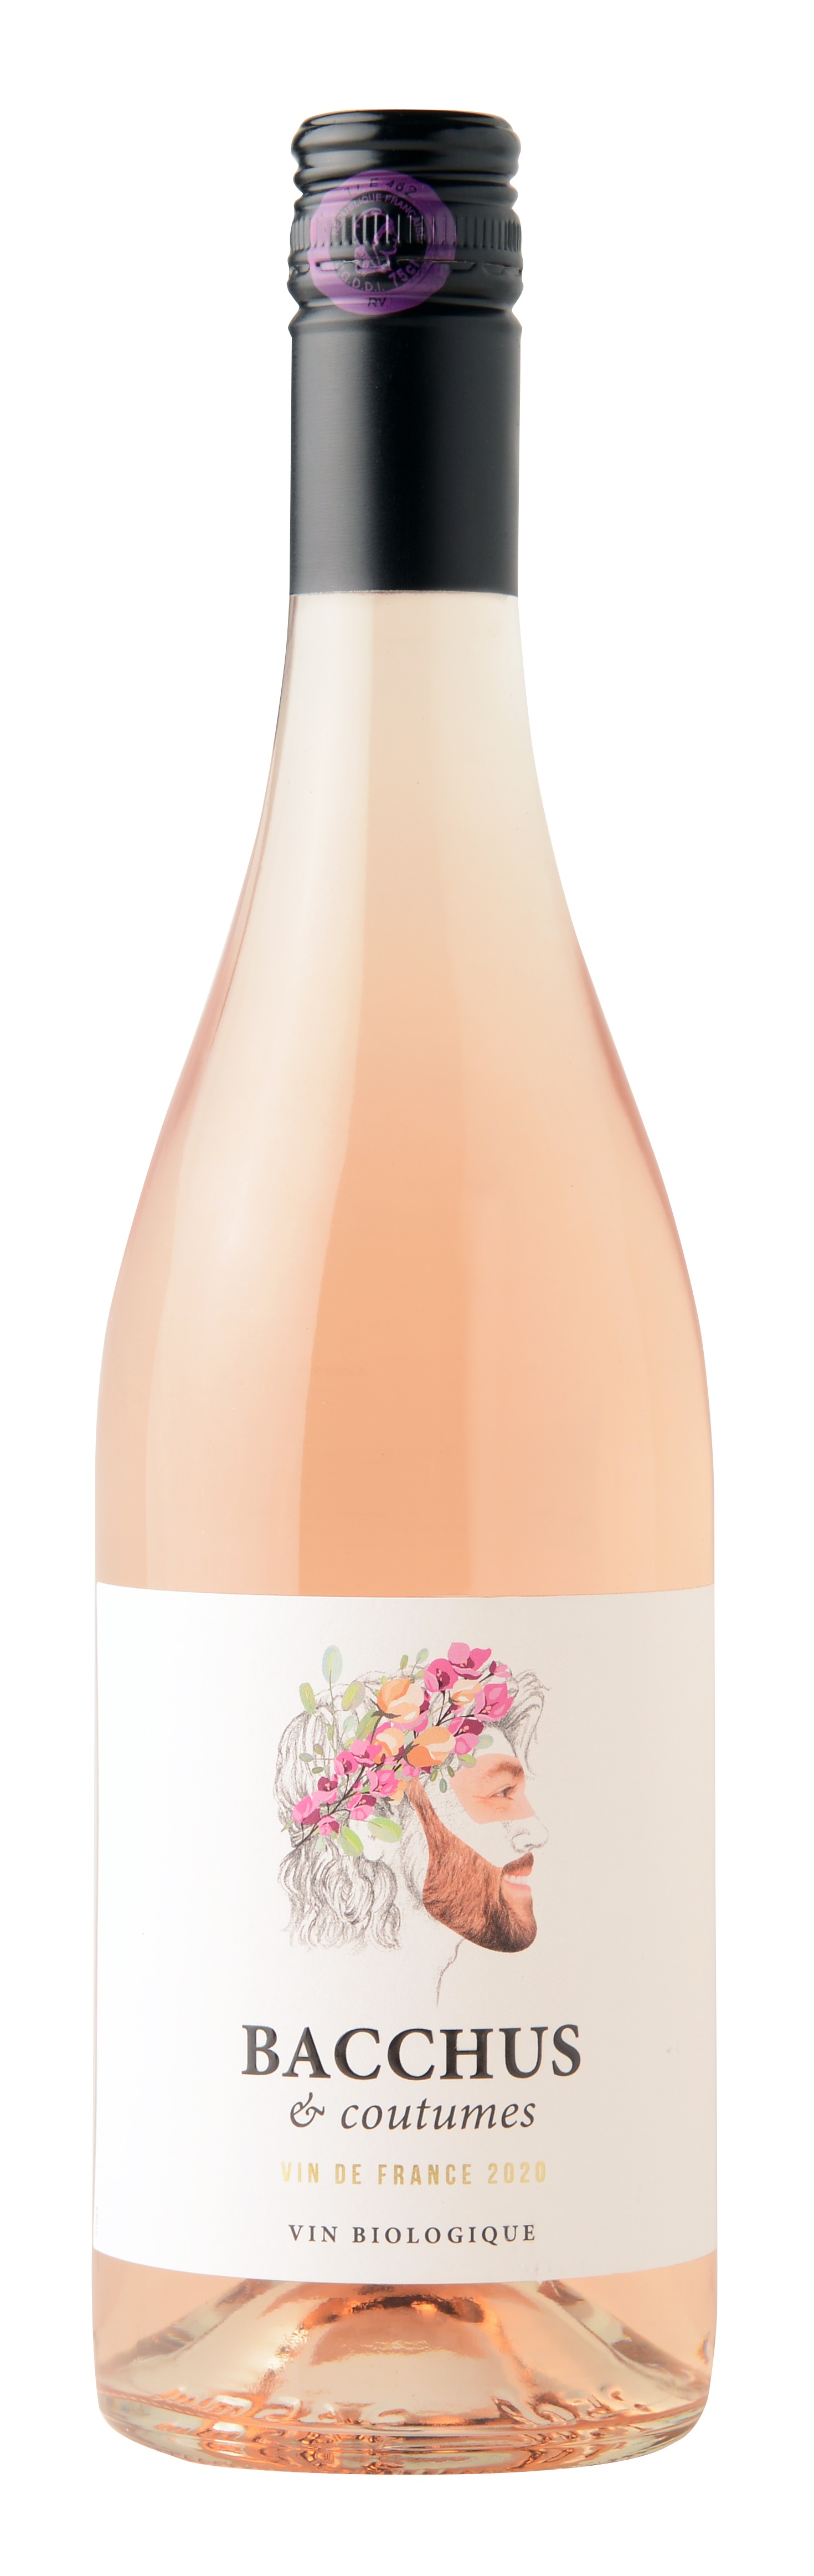 76732 Bacchus & Coutumes rose 2020 0,75 liter